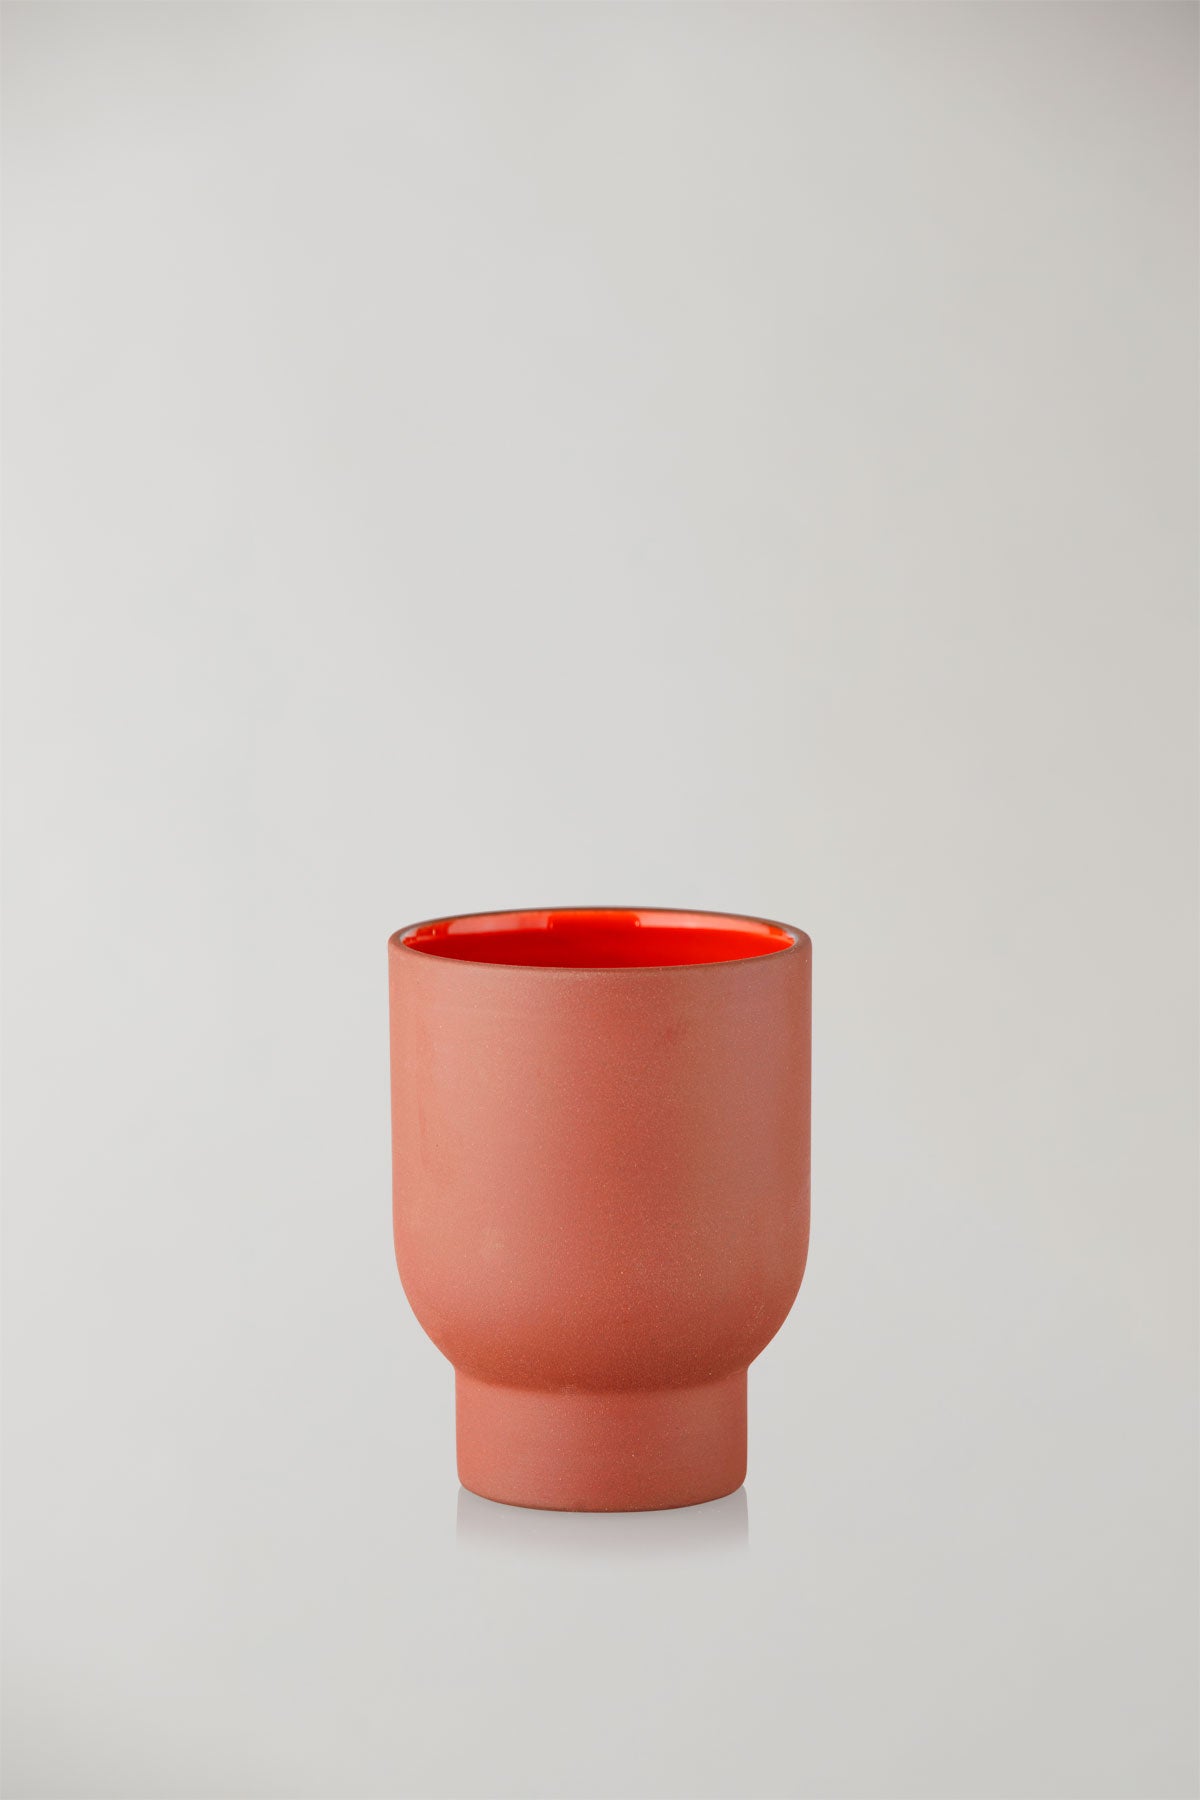 CLAYWARE, CUP, TALL, 2 STK, TERRACOTTA/RED